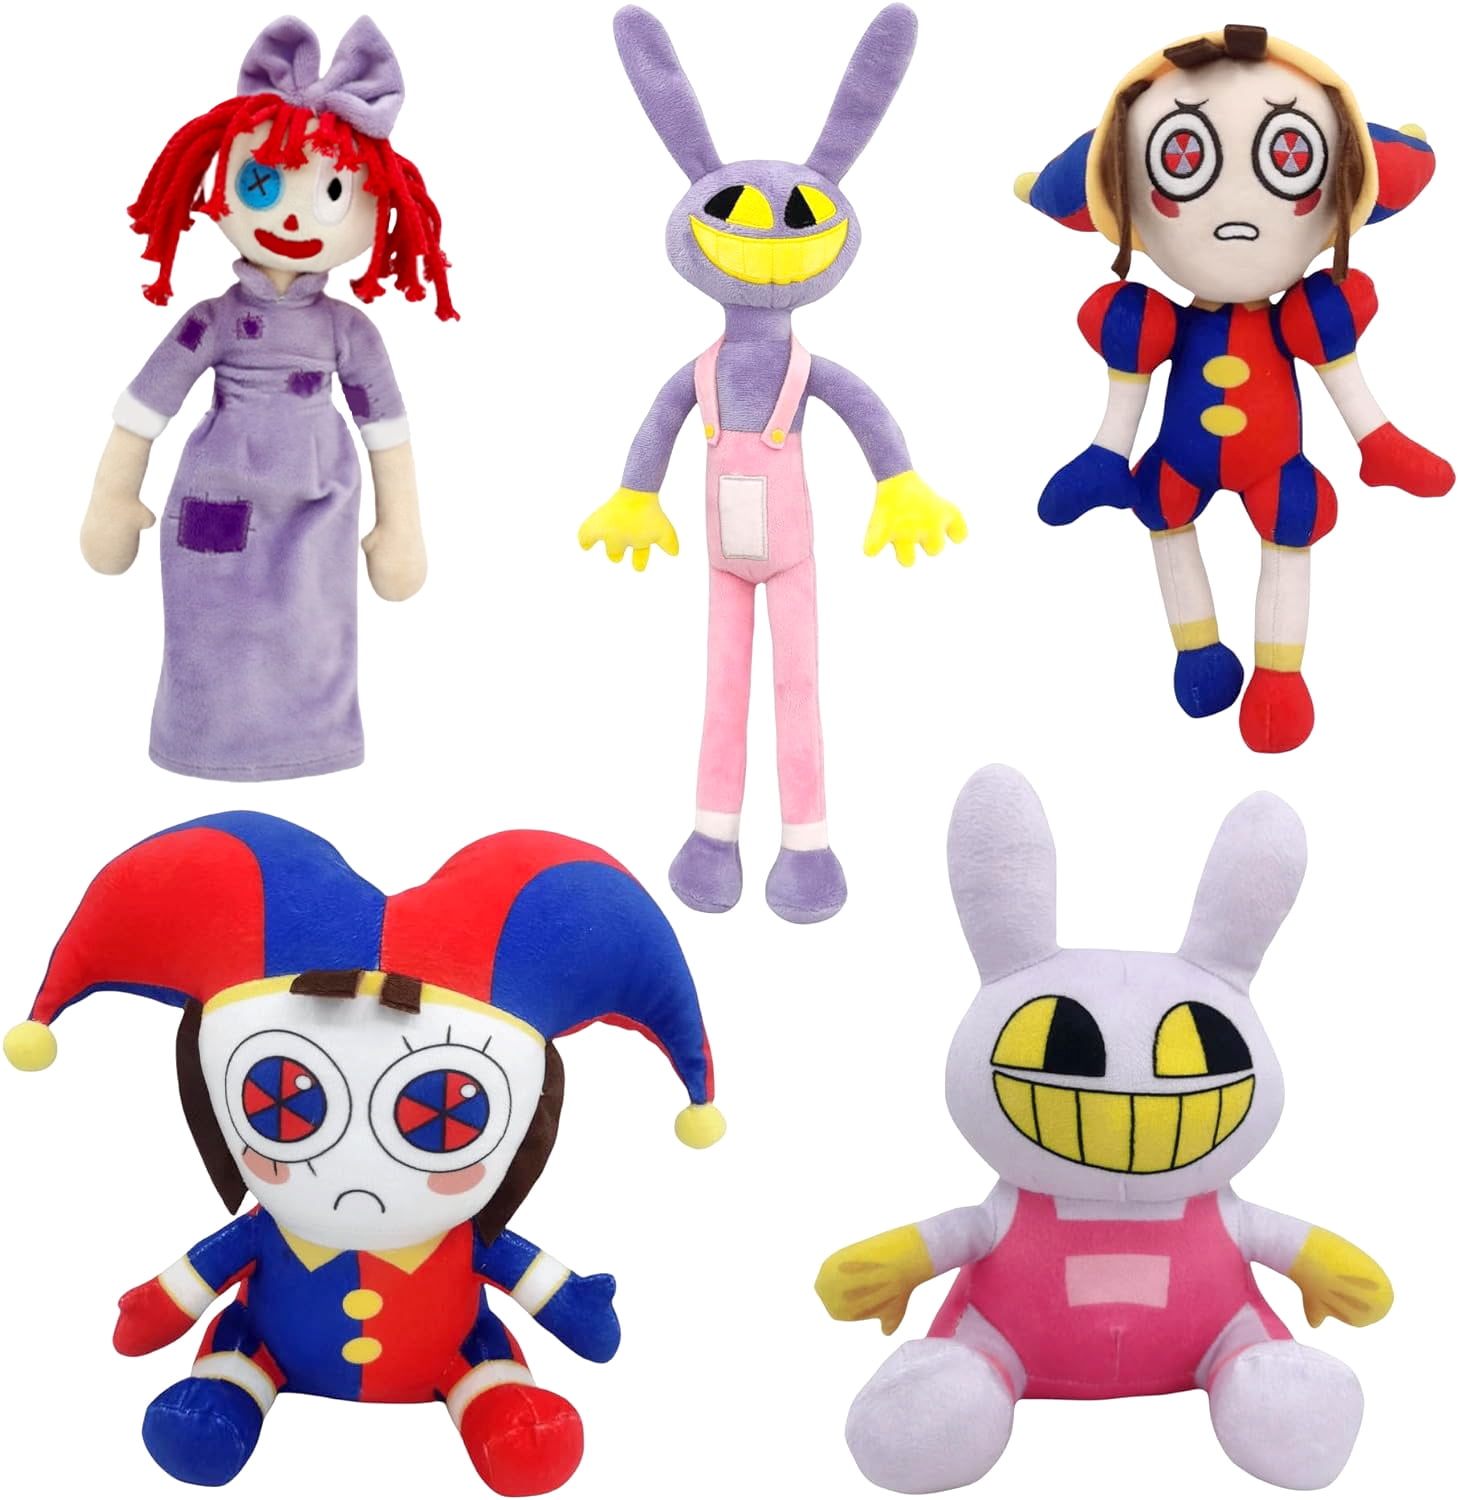 The Amazing Digital Circus Plush Toys, Pomni&Jax Plushies Toy for TV Fans  Gift, Cute Stuffed Figure Pomni Jax Doll for Kids and Adults Birthday  Hallo-ween Christmas Gift(4 pcs) 